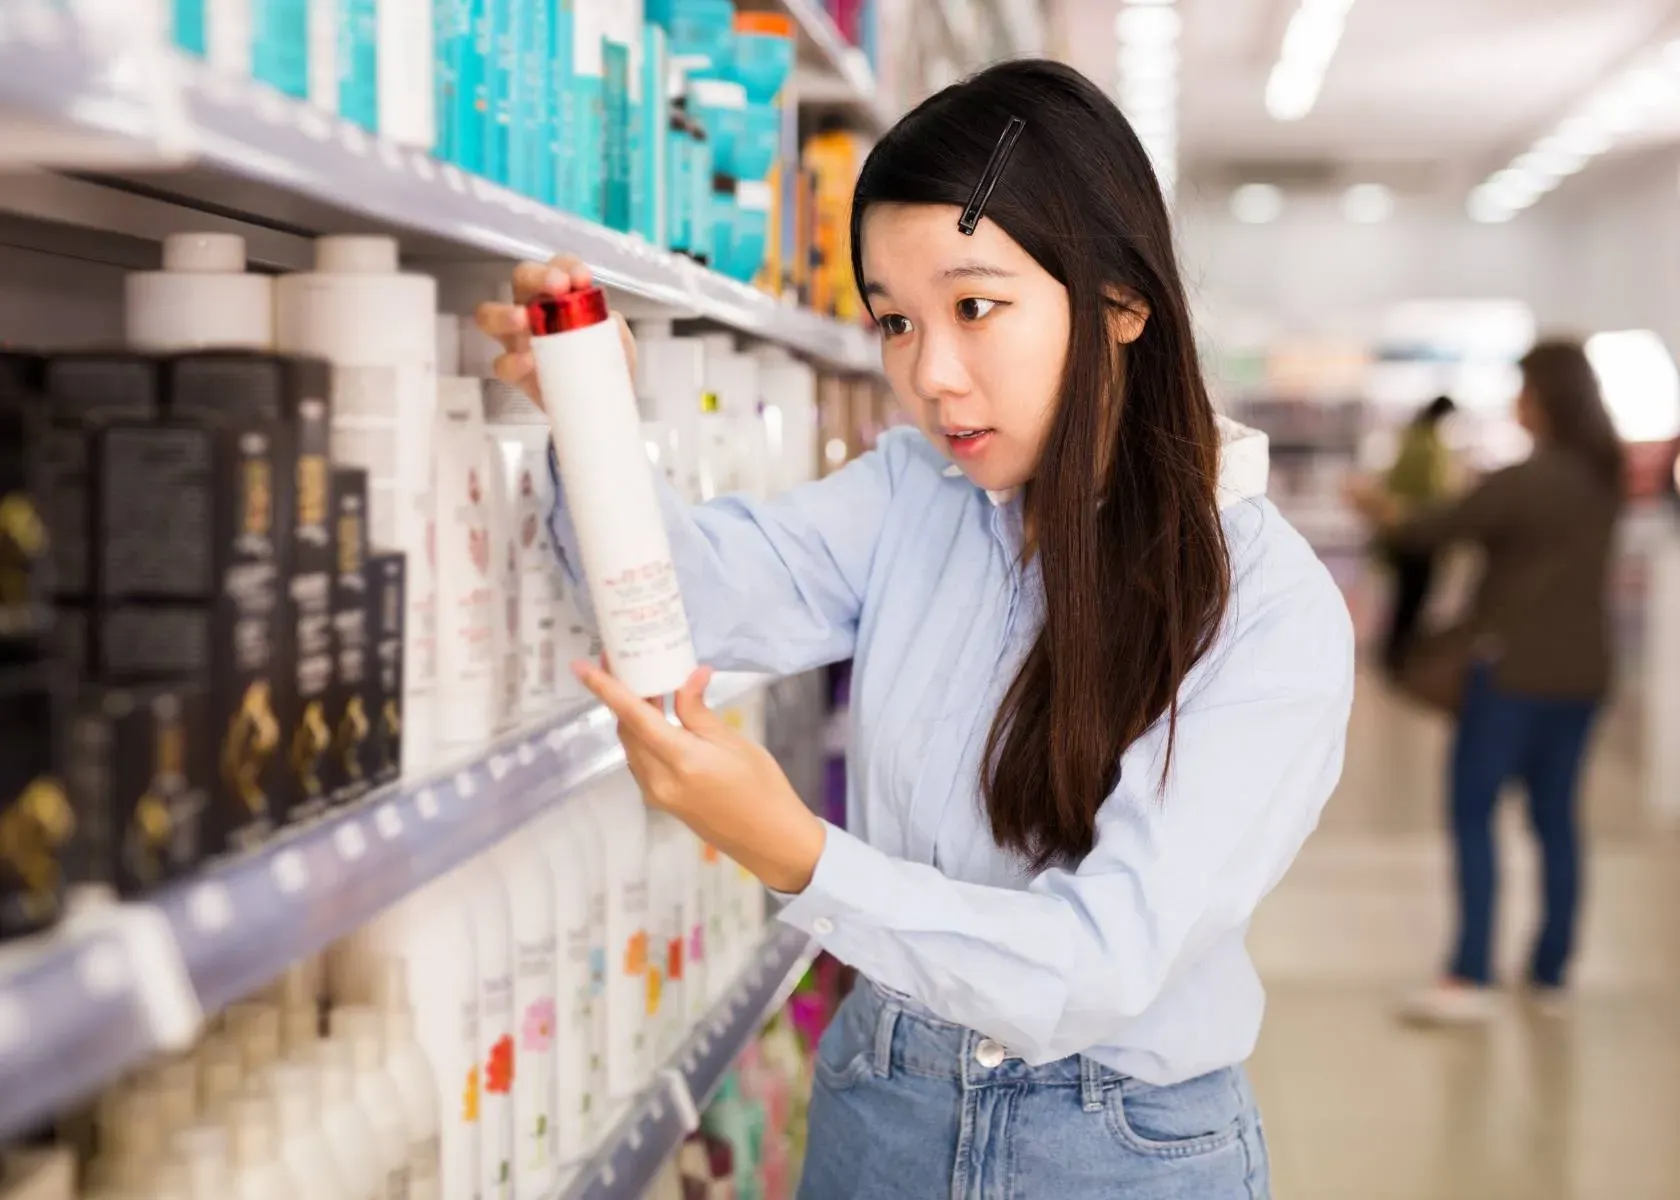 Ingredients to Look for In a Clarifying Shampoo